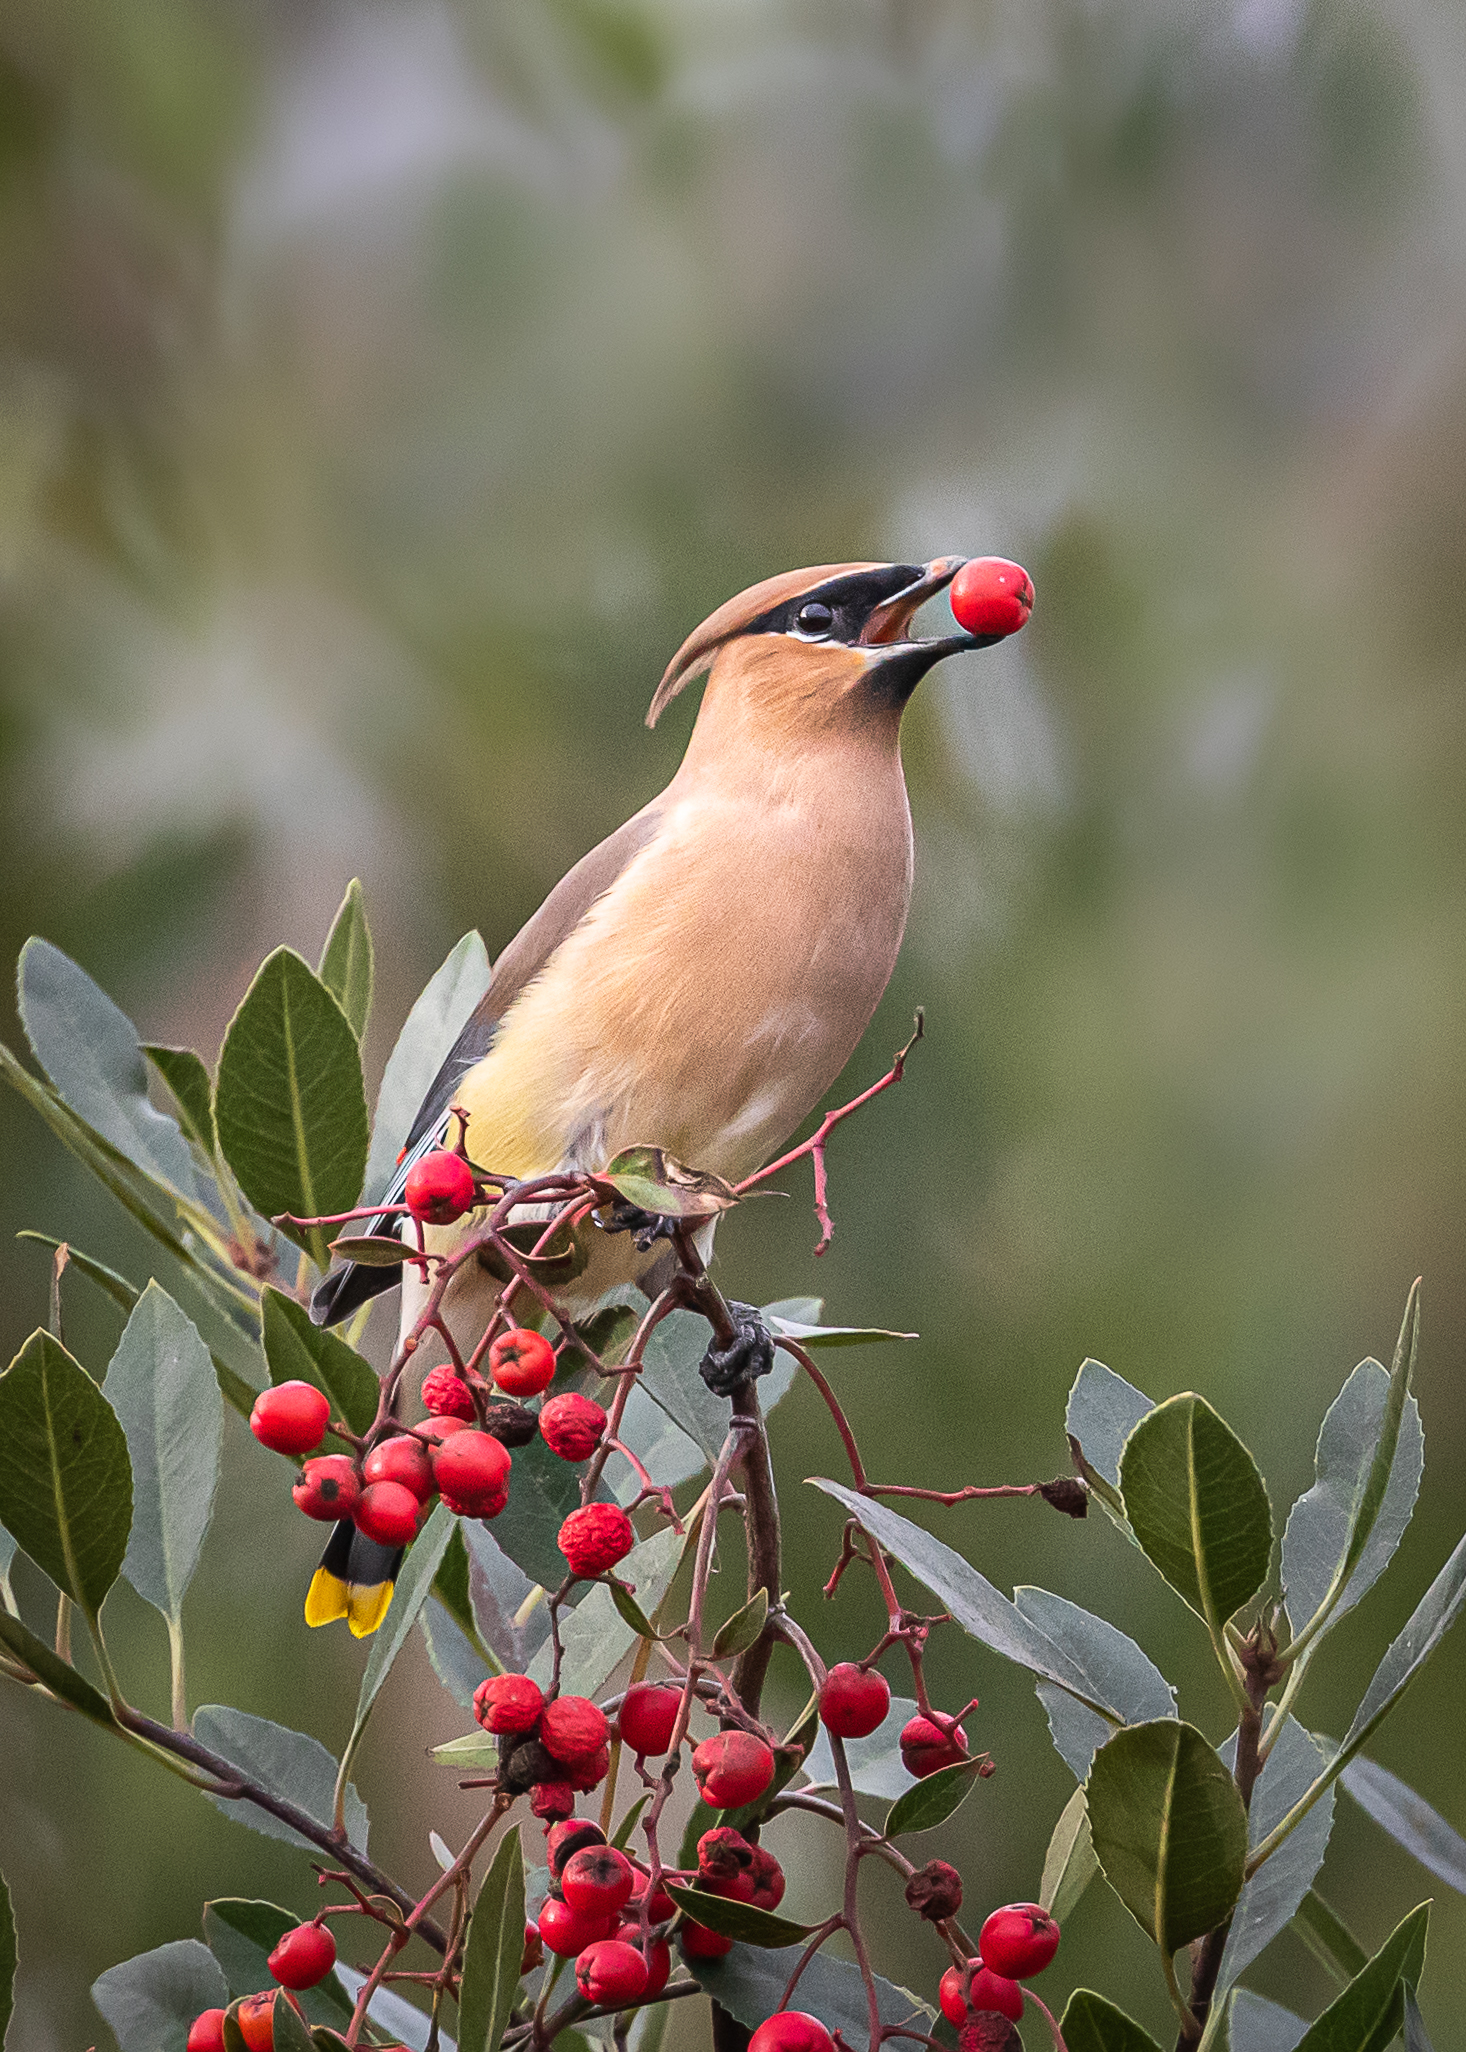 Cedar Waxwing on a Toyon Tree branch covered in red berries with a berry in its mouth.